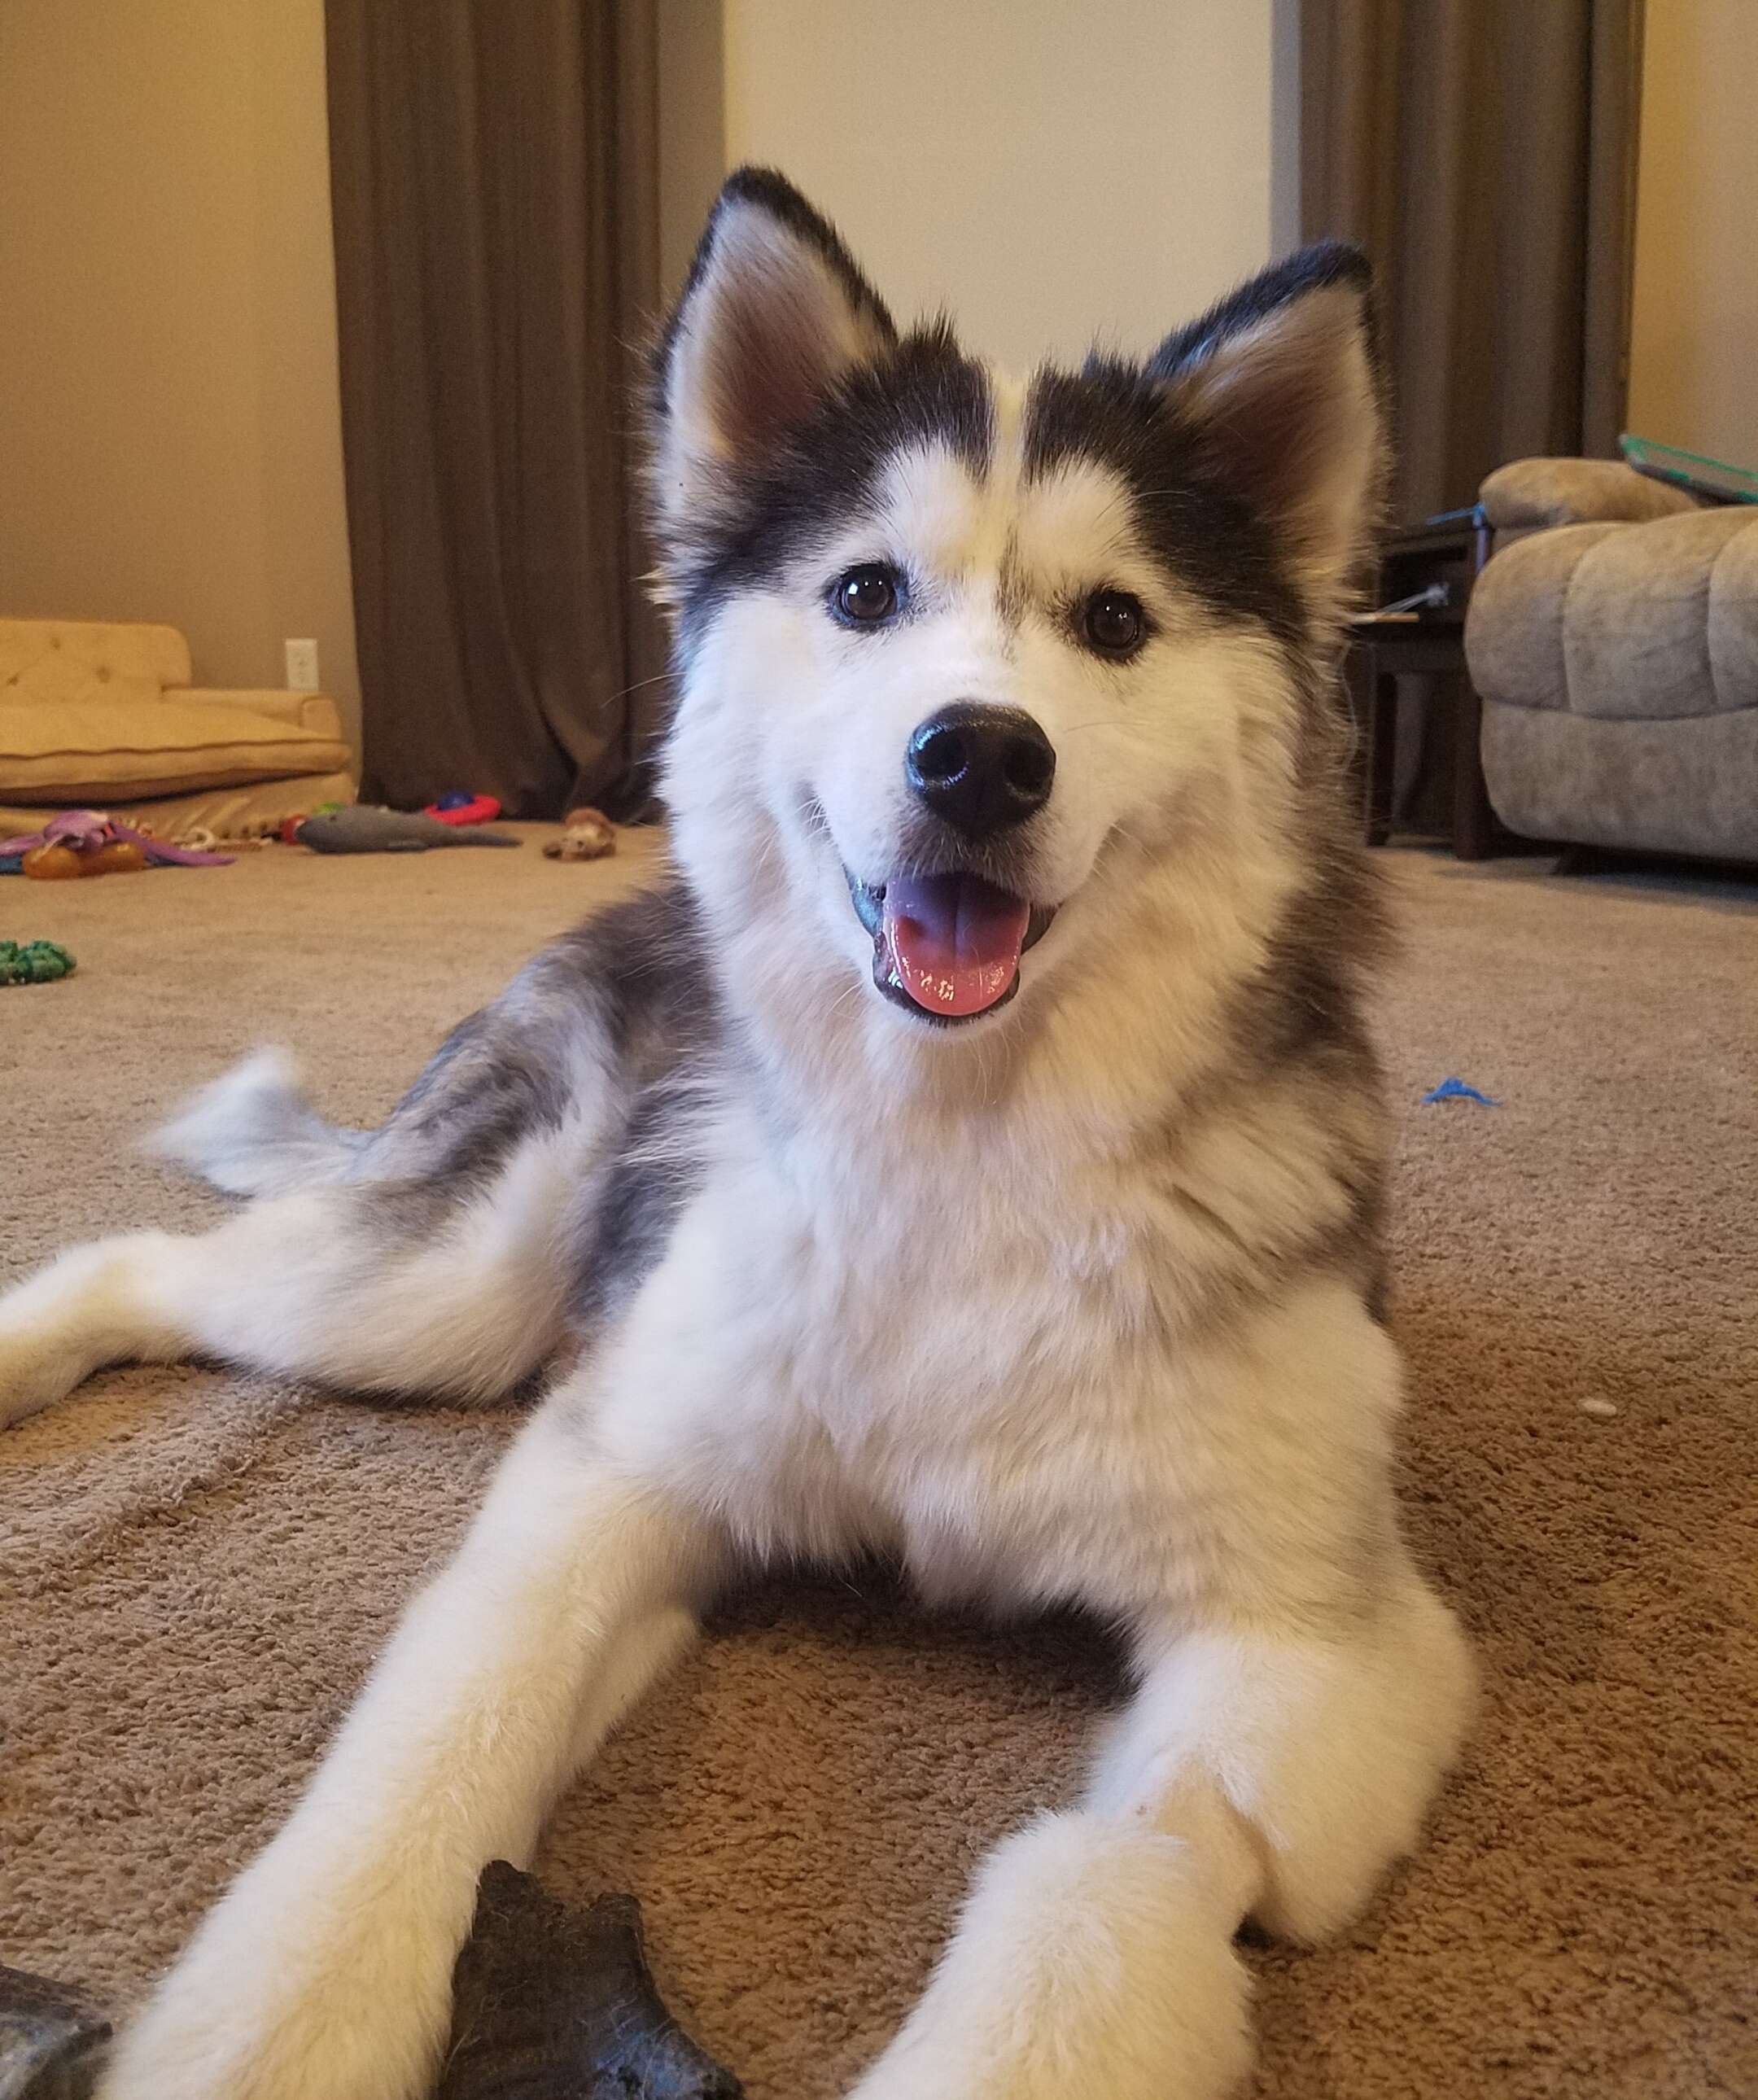 Husky is so fluffy now